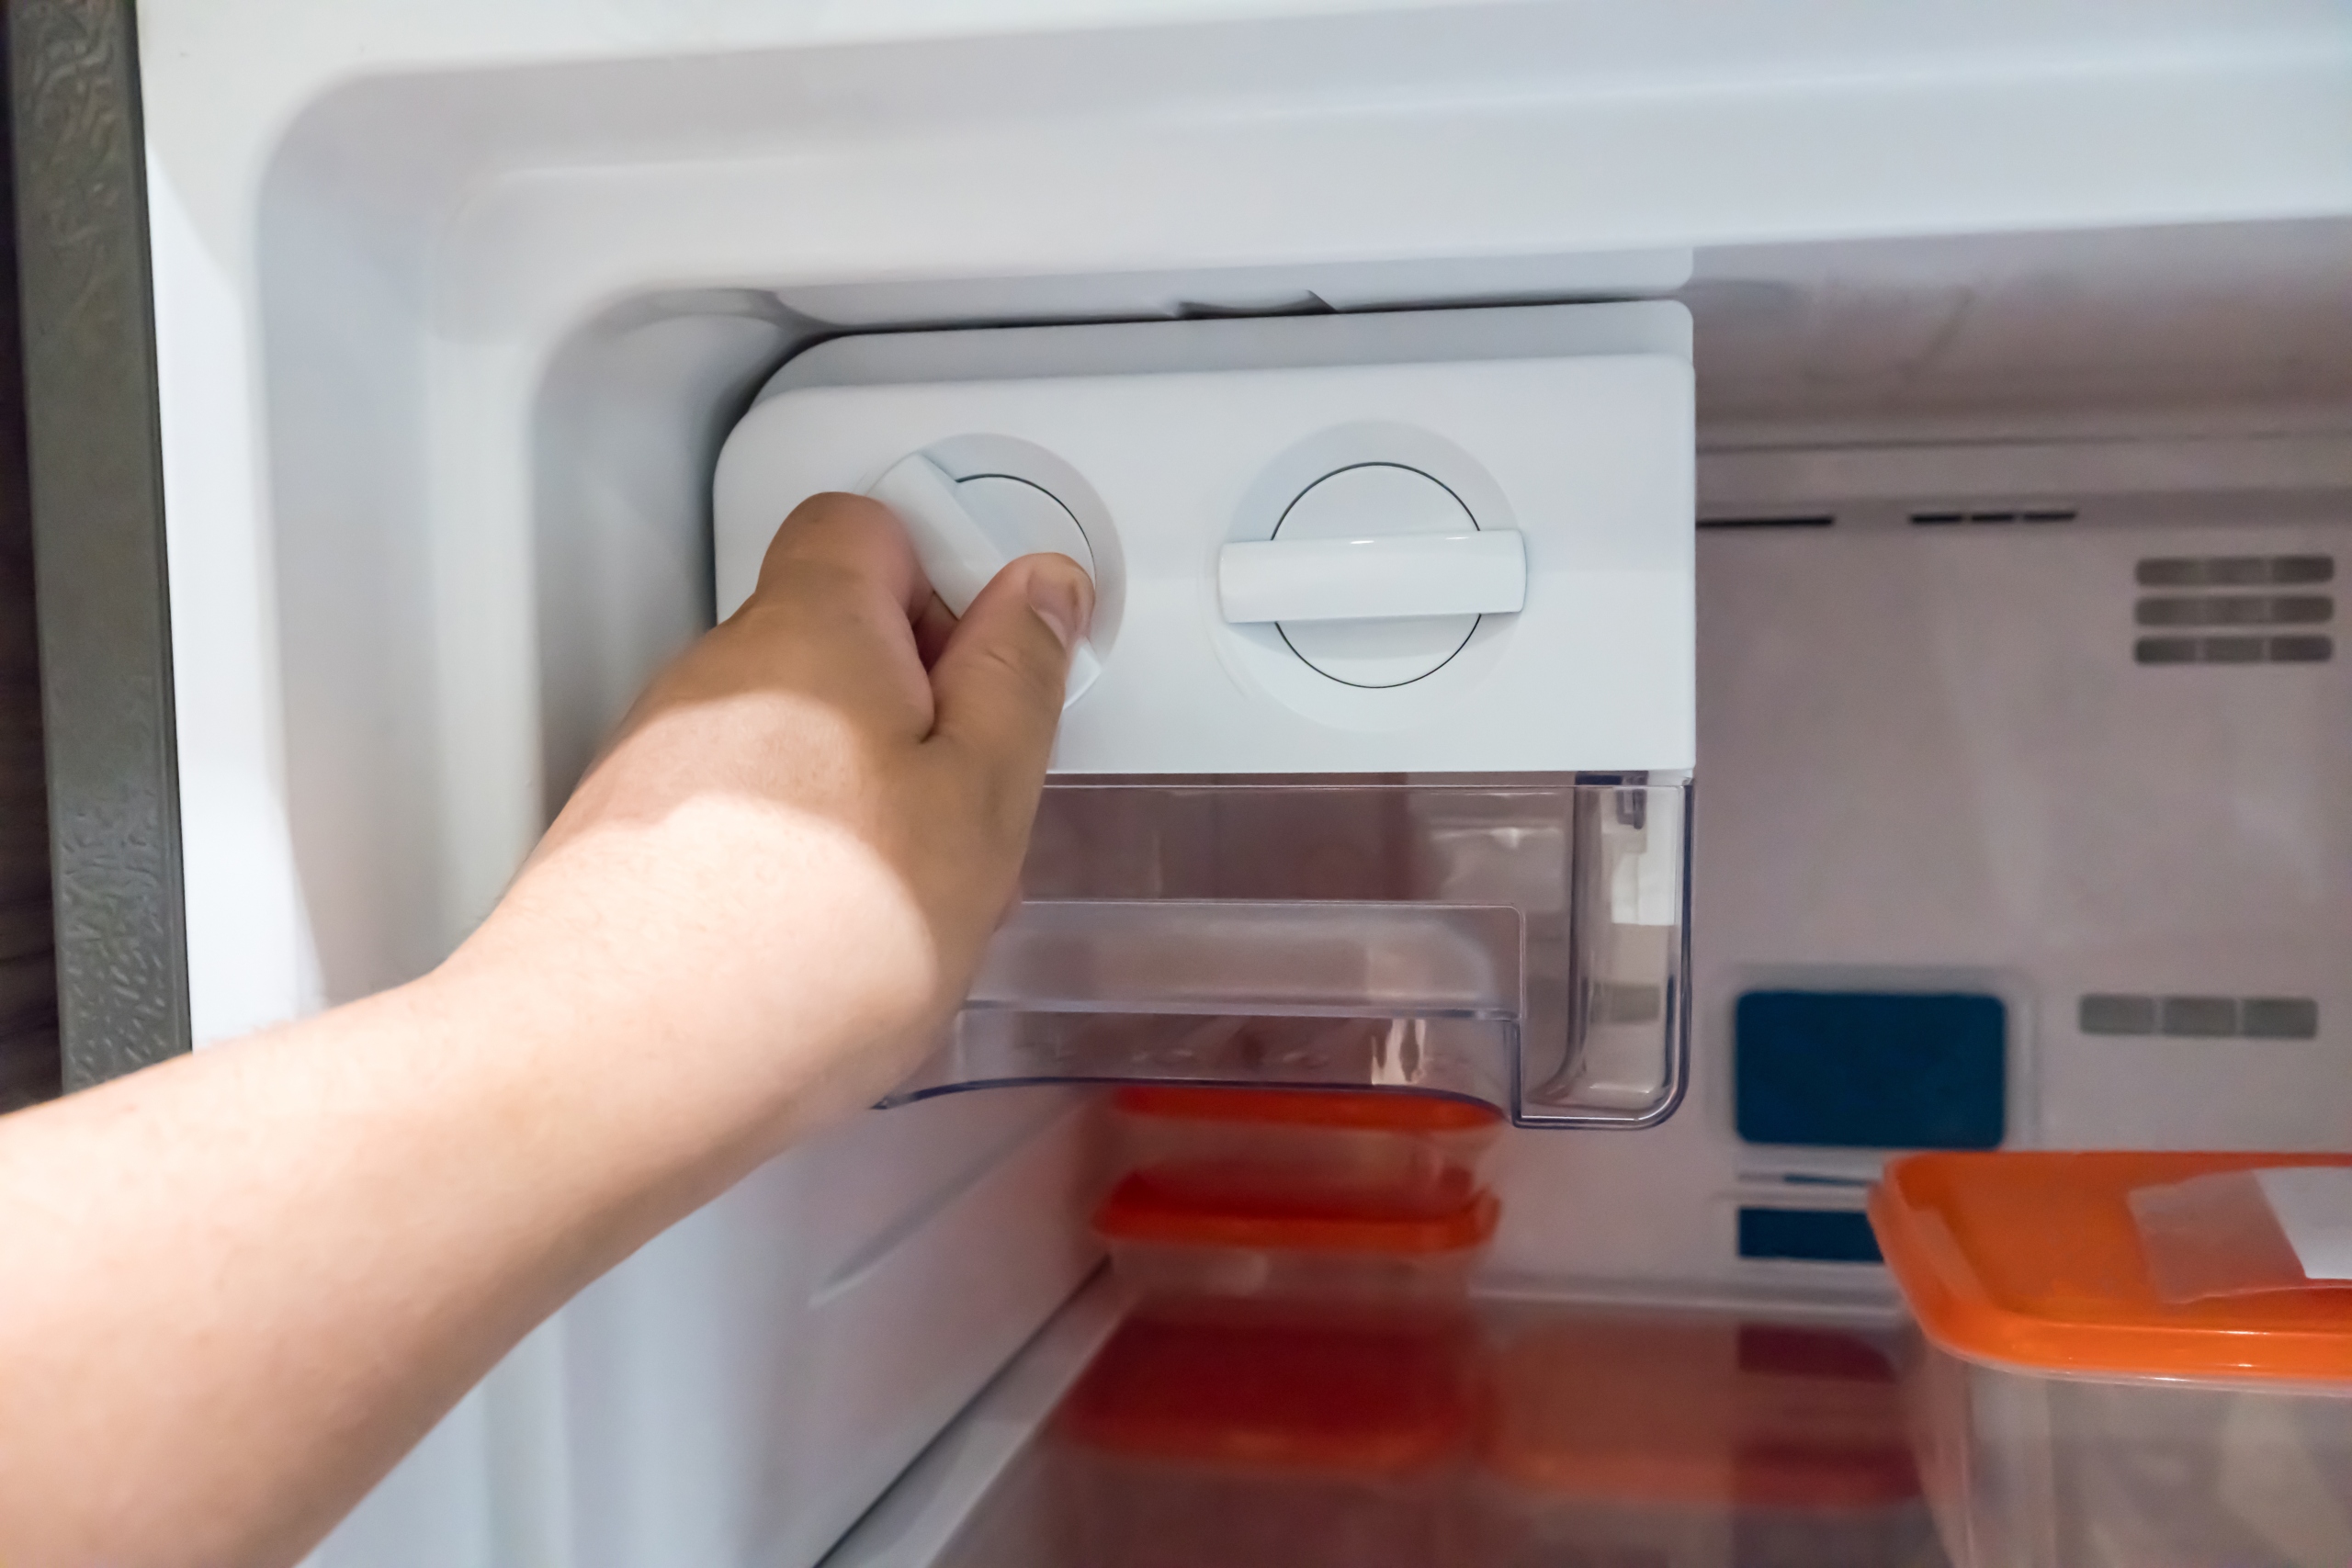 How To Disconnect Ice Maker How to Disconnect Your Fridge Ice Maker in Under an Hour | 21Oak